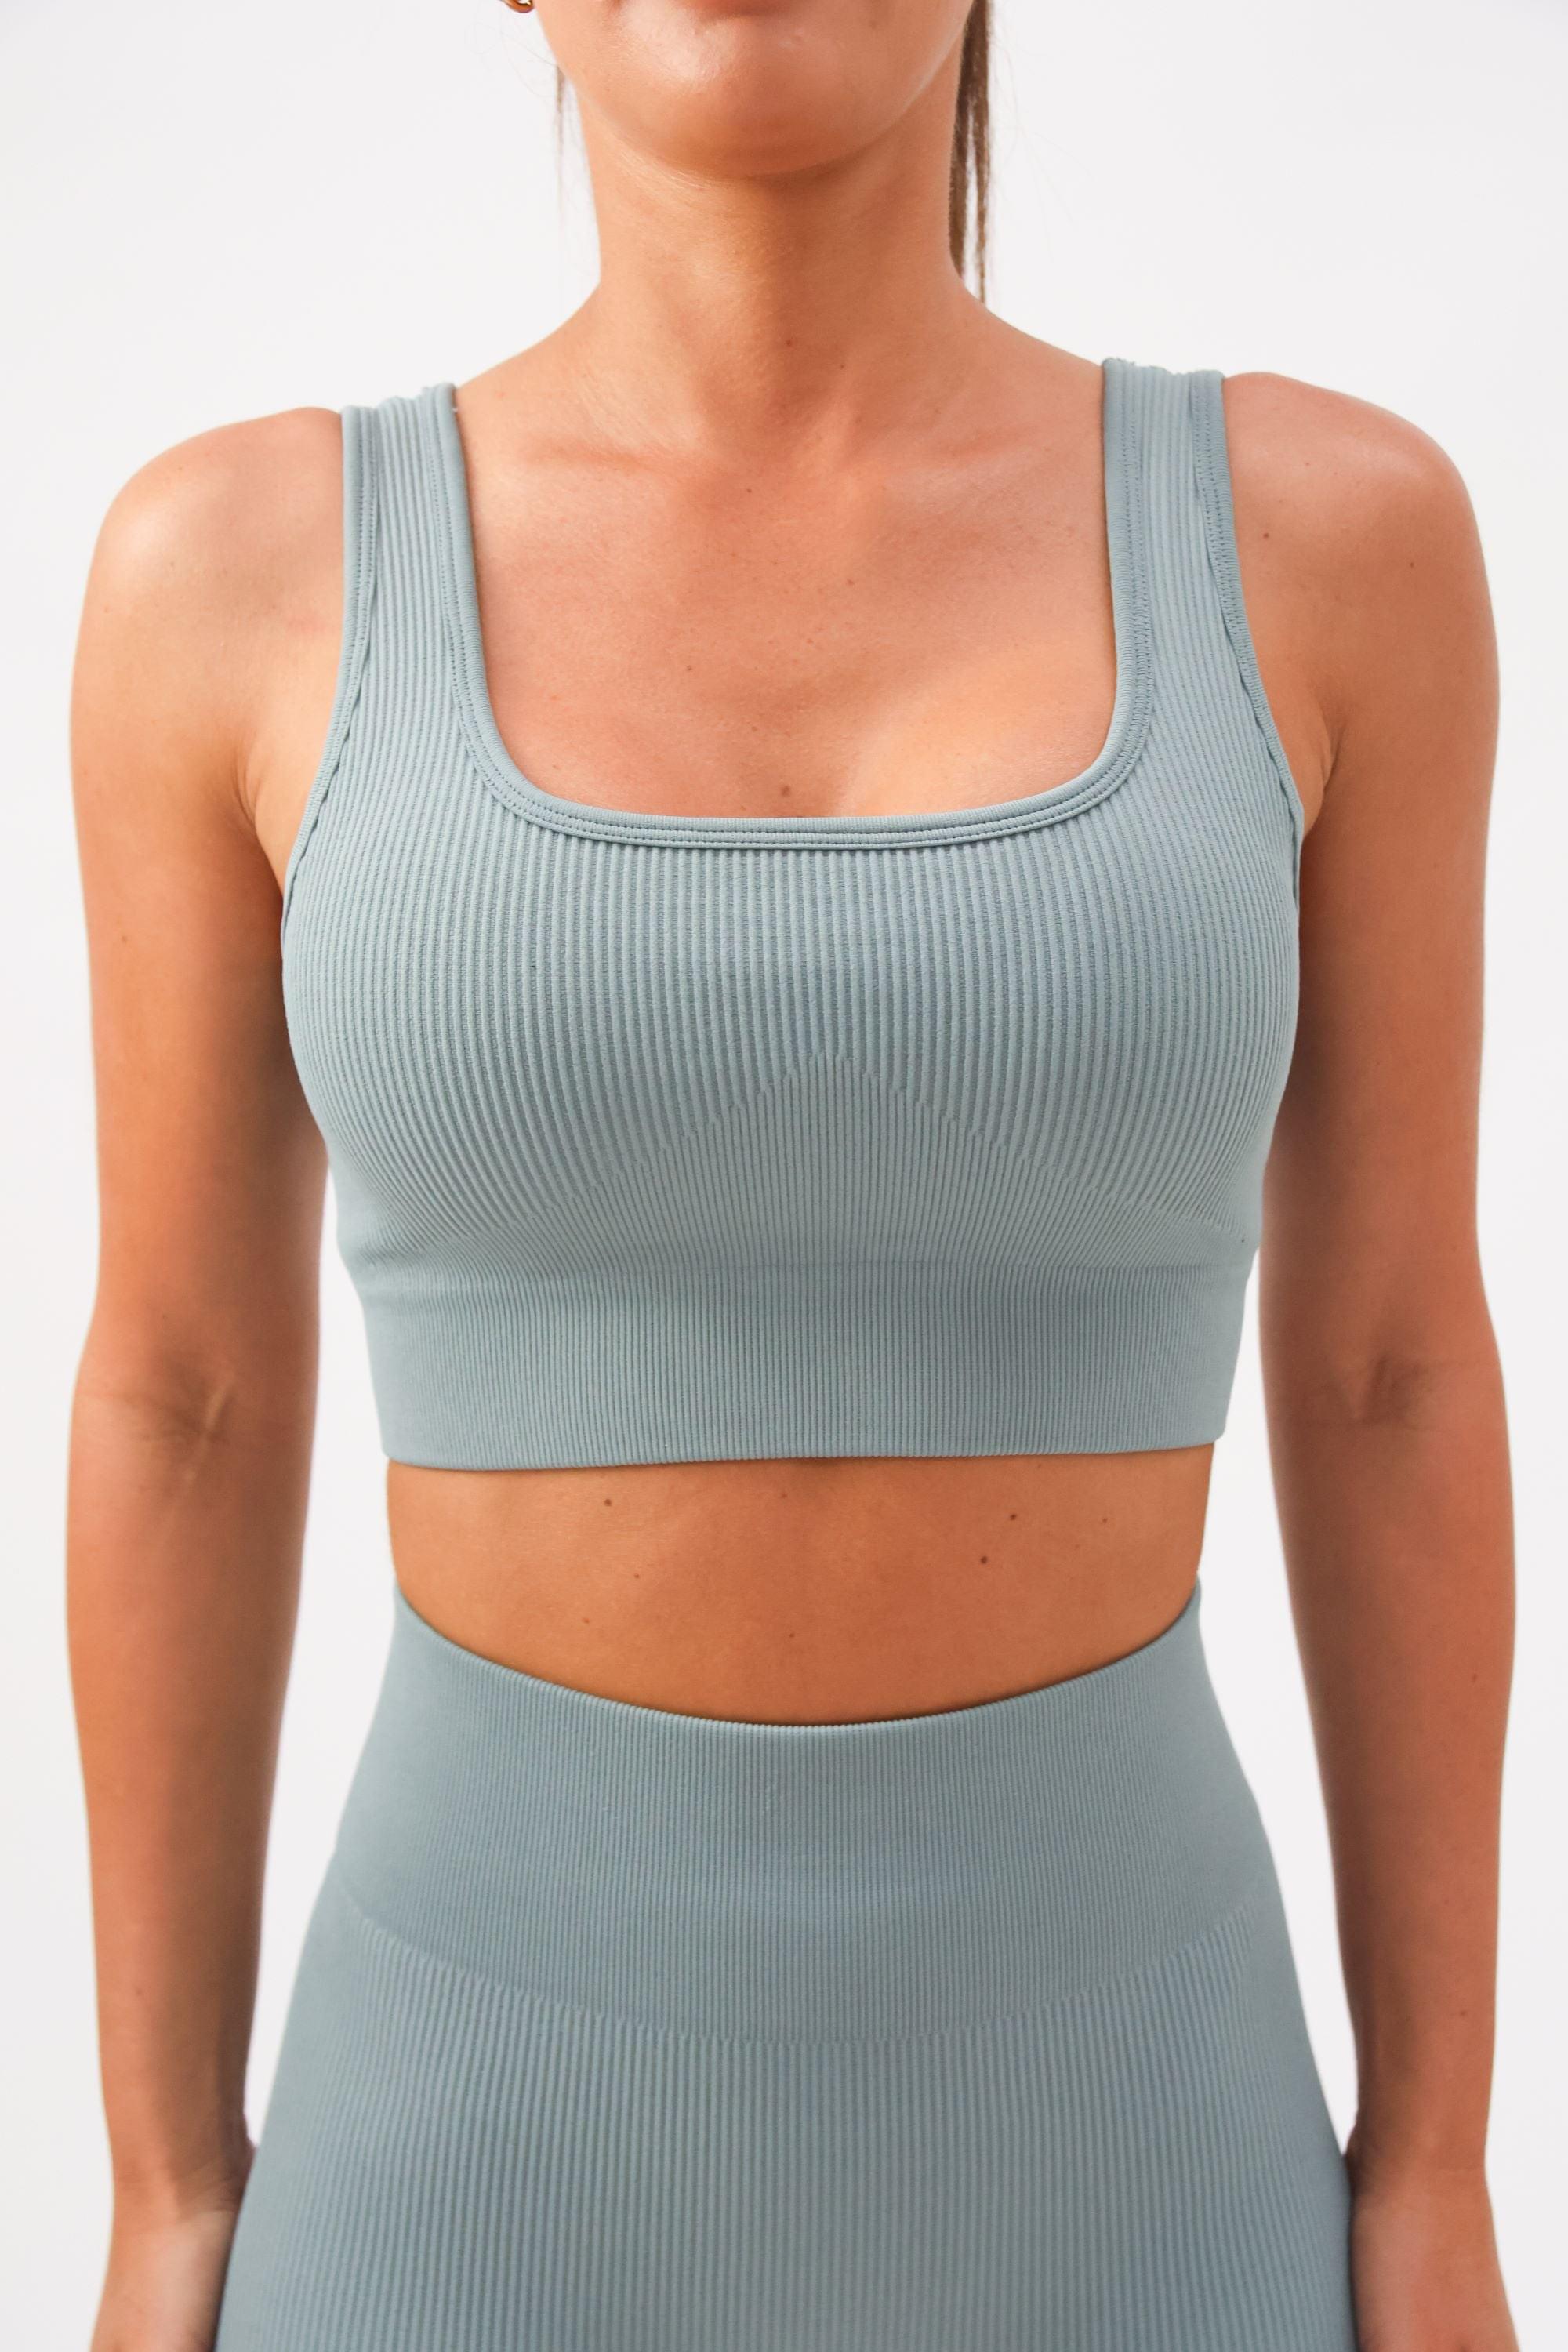 Shop Sports Bras for Women At Hermosa Athletica